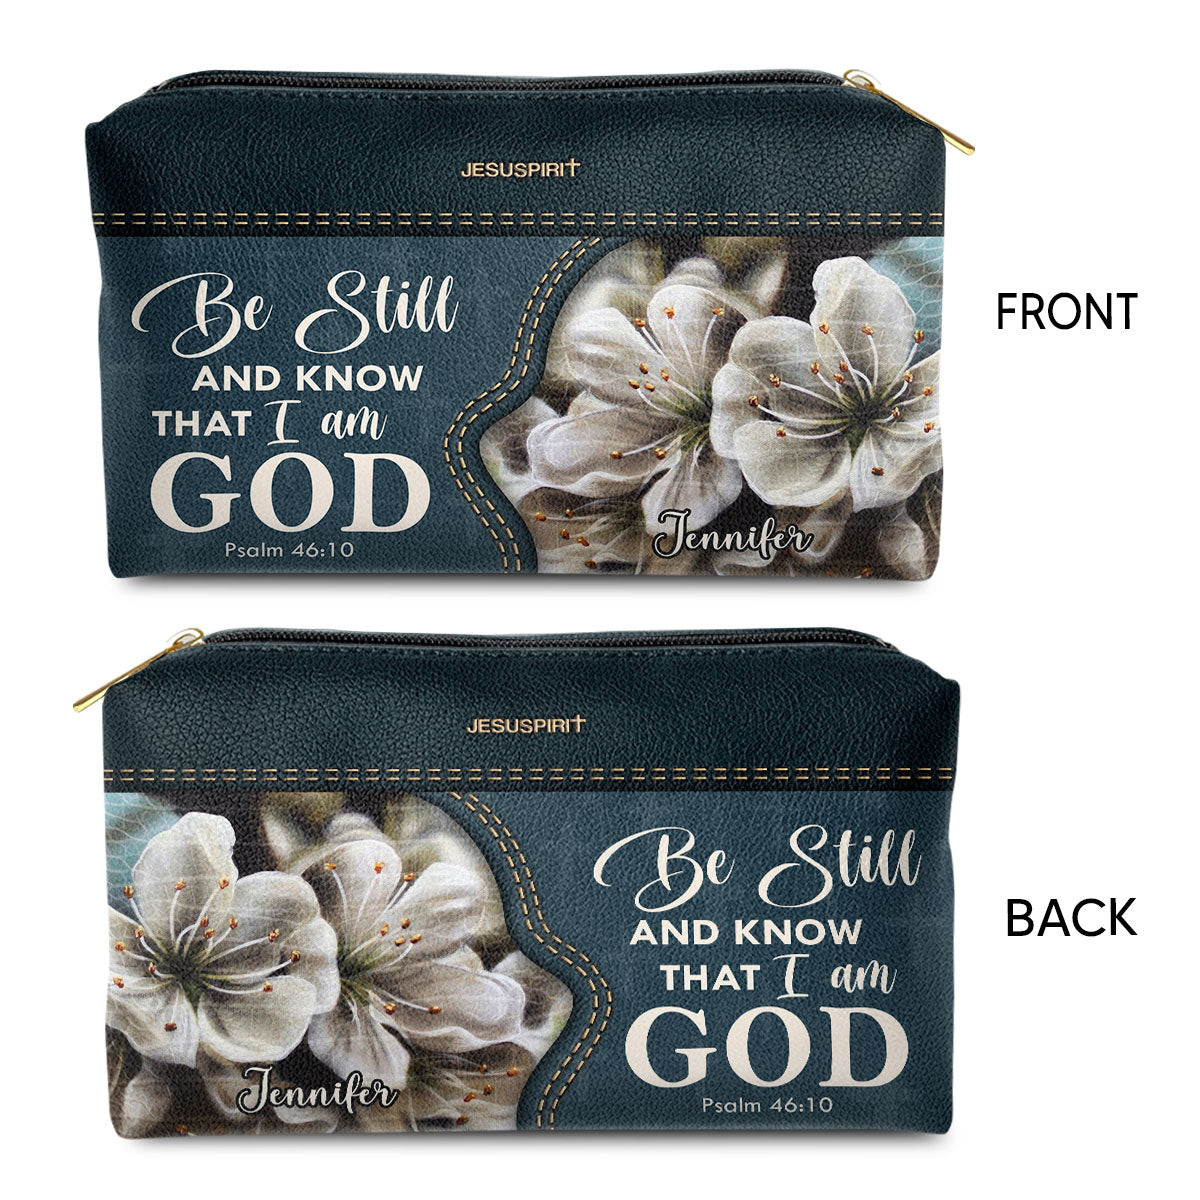 Be Still And Know That I Am God Psalm 4610 Personalized Leather Pouch With Zipper